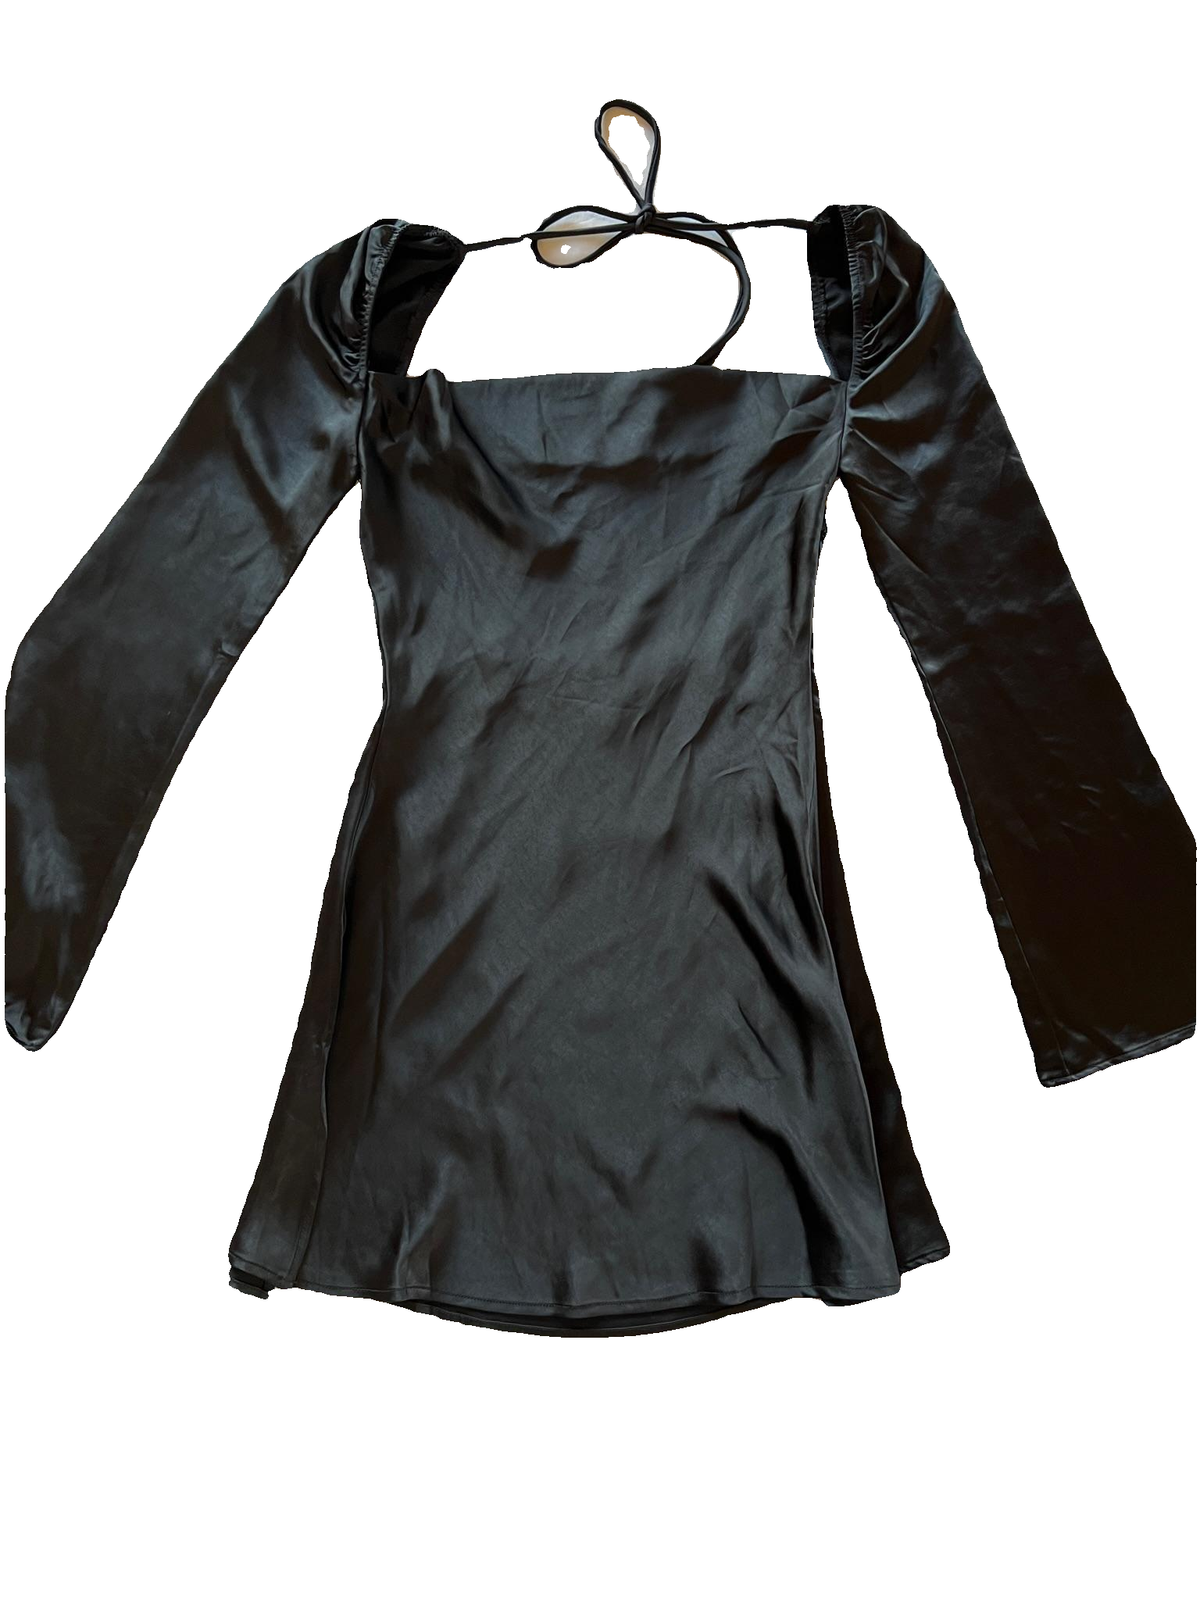 Beginning Boutique - Black "Marienne" Silk Mini Dress - NEW WITH TAGS FINAL SALE